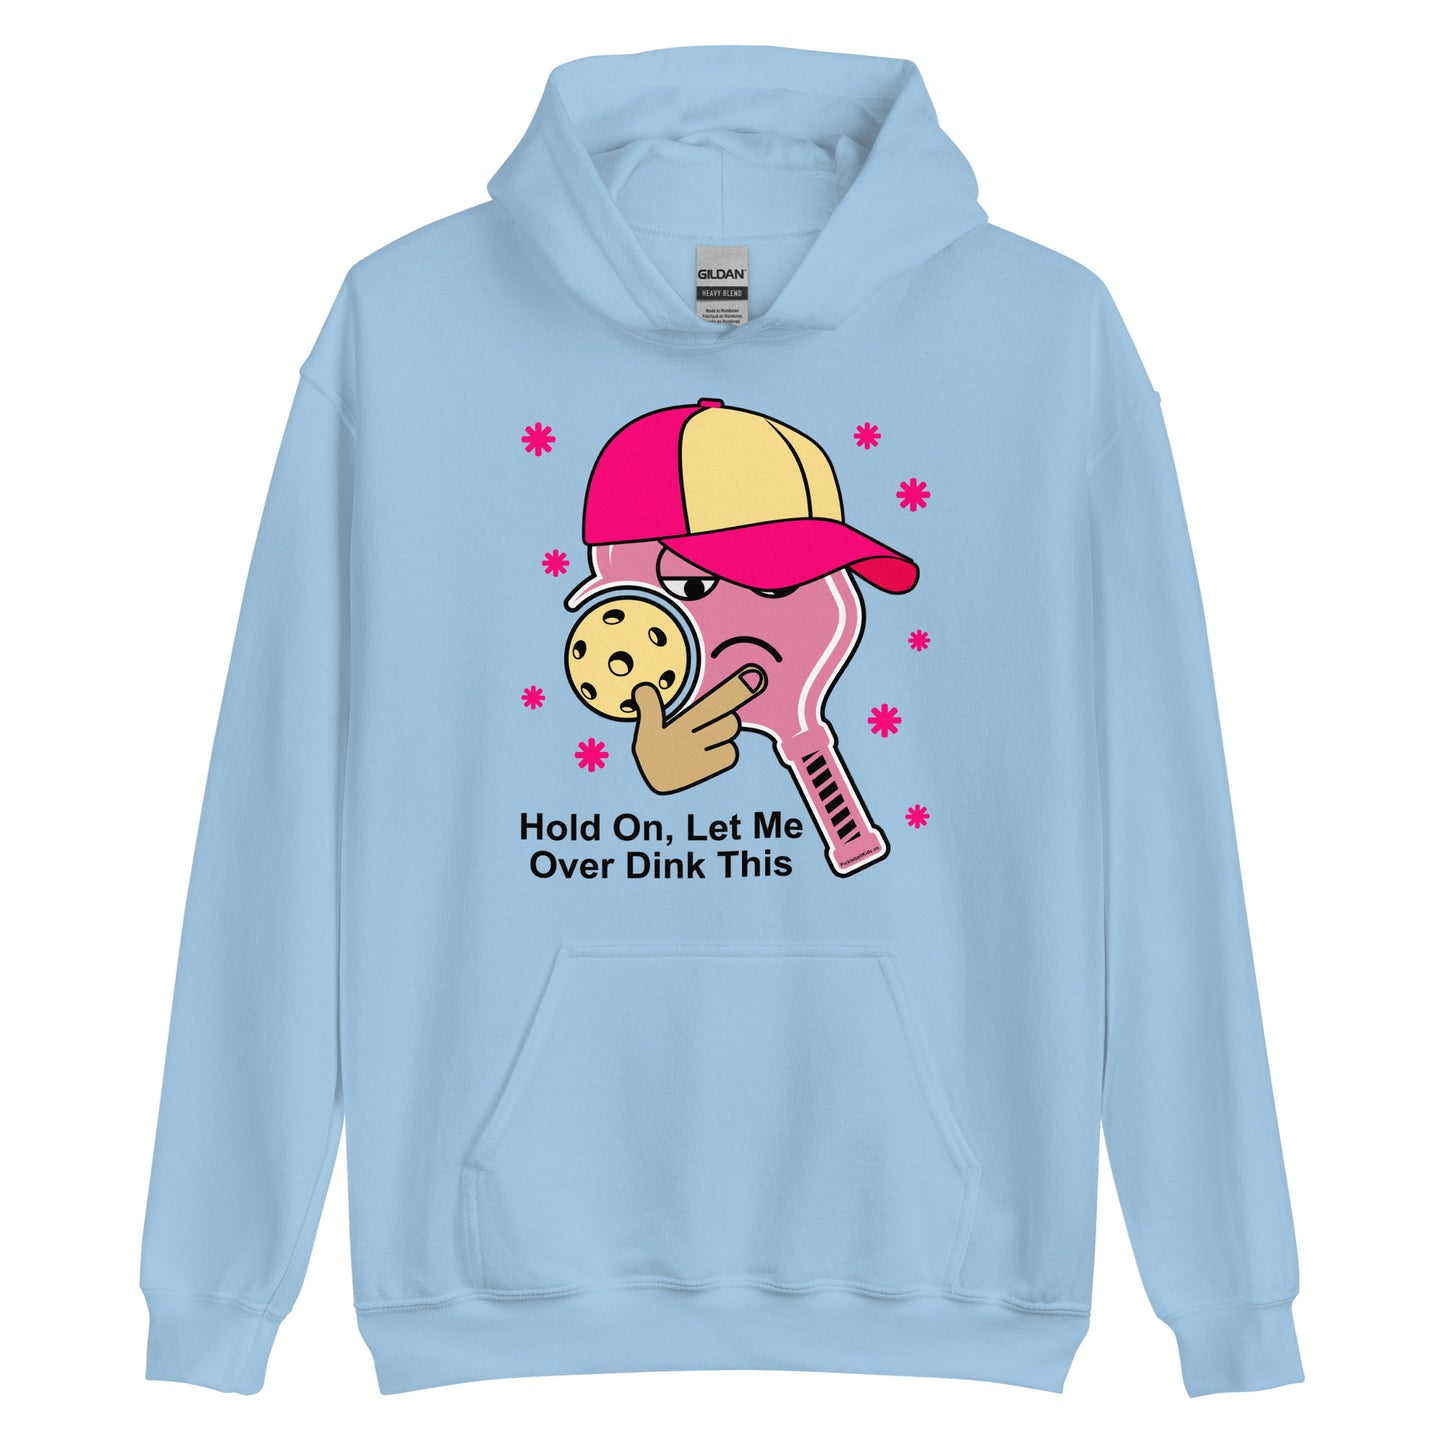 Fun Pickleball Unisex Hoodie, "Hold On, Let Me Over Dink This" Thinking Pun